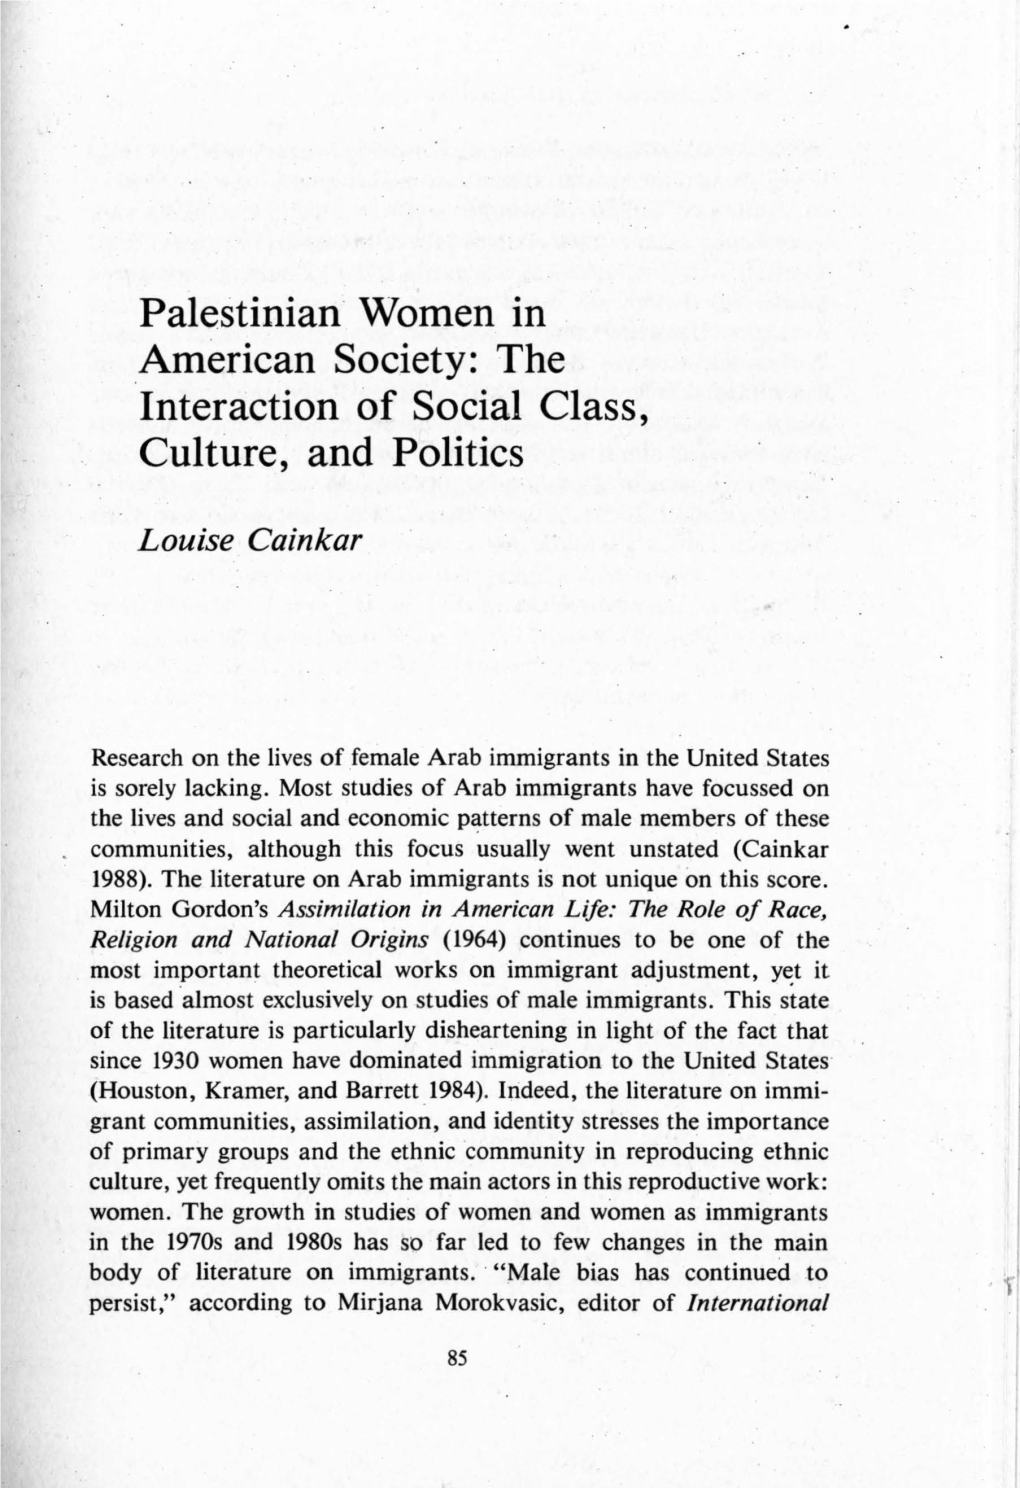 Palestinian Women in American Society: the Interaction of Social Class, Culture and Politics